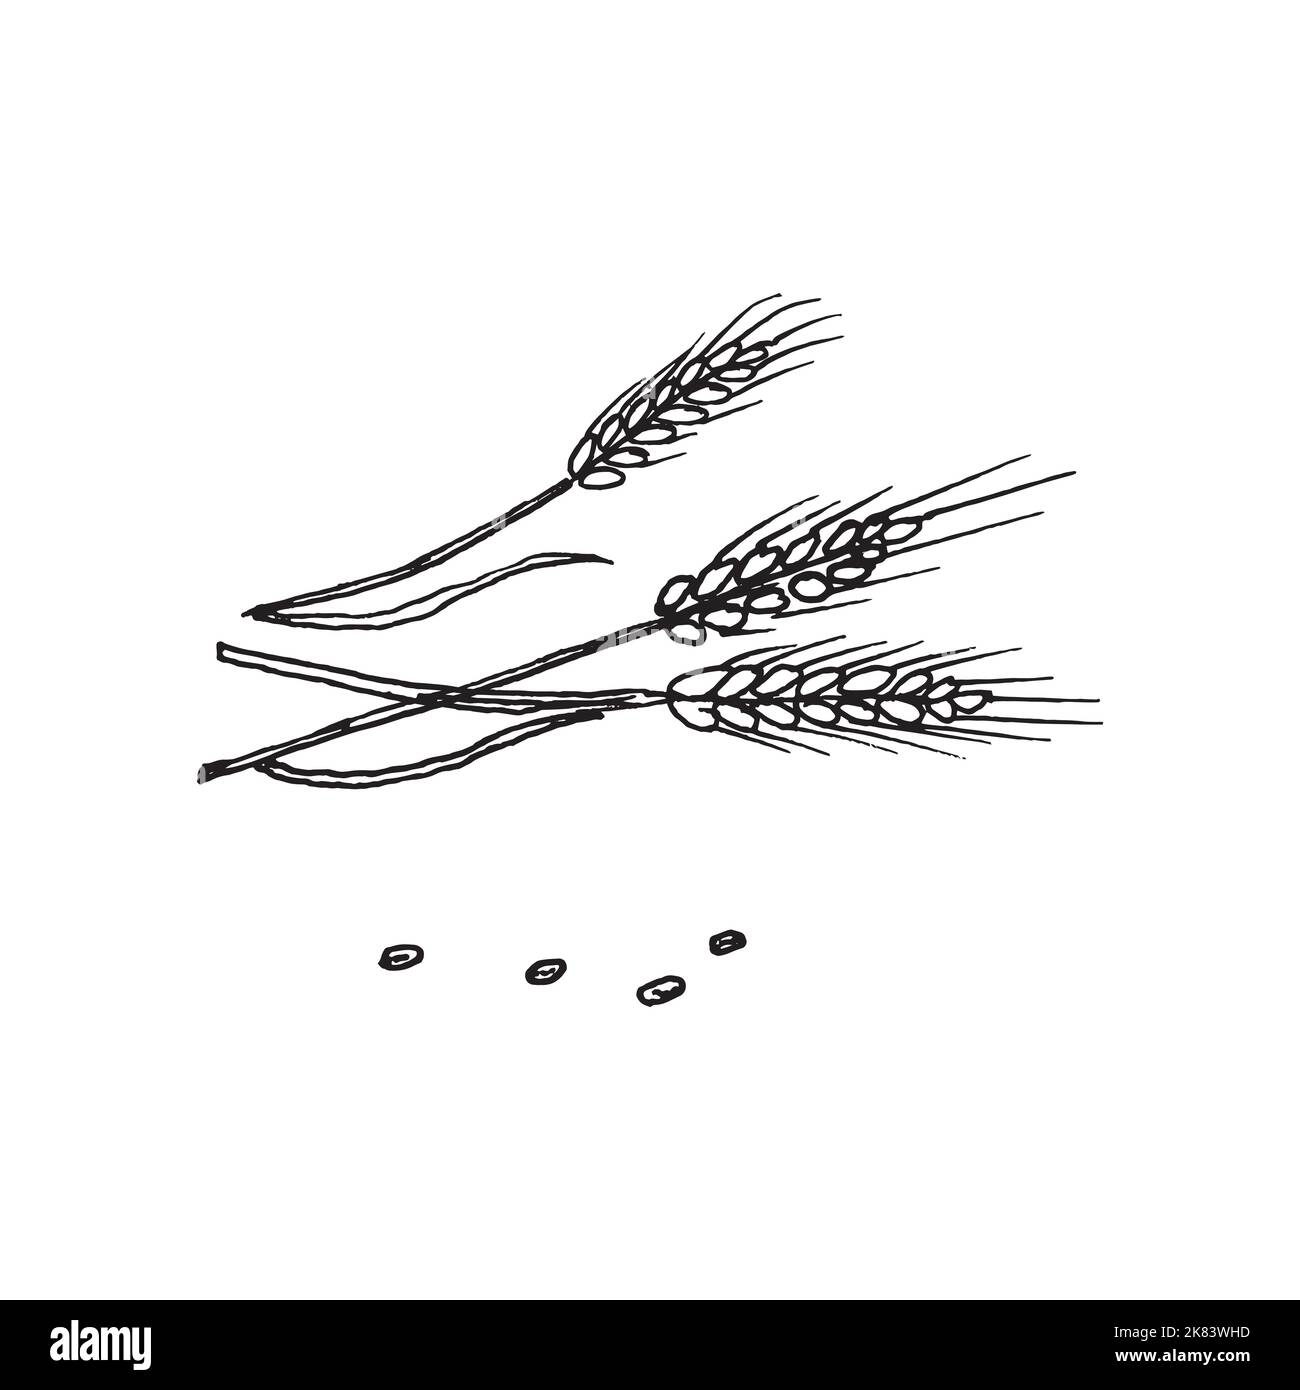 Hand drawn wheat. Realistic wheat ear. Black and white sketch of agricultural plant. Barley and rye crop. Harvesting grain for flour production. Stock Vector